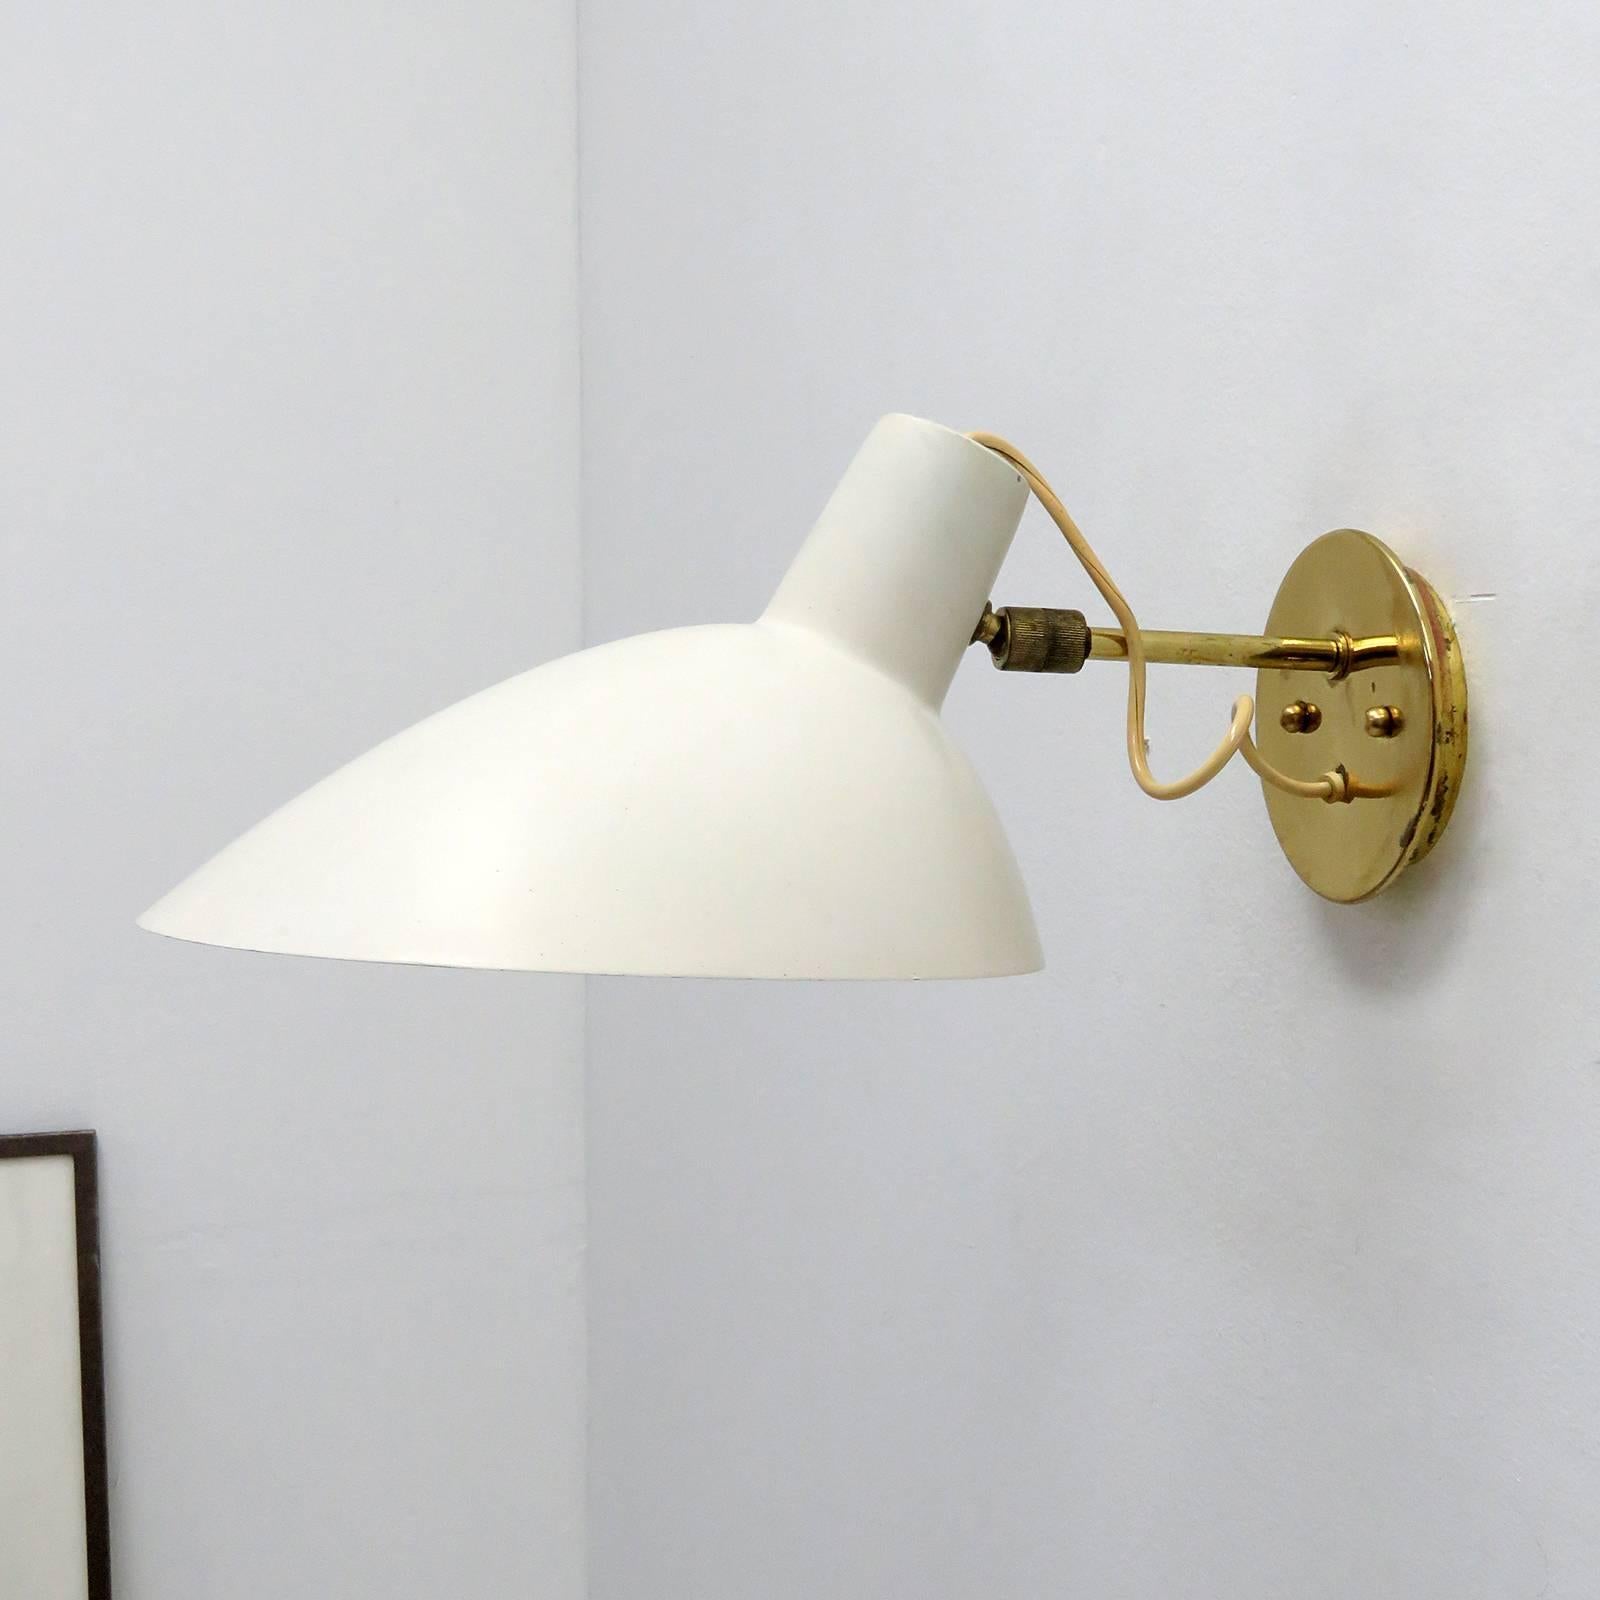 Mid-Century Modern Wall Light by Vittoriano Viganò for Arteluce, 1950s